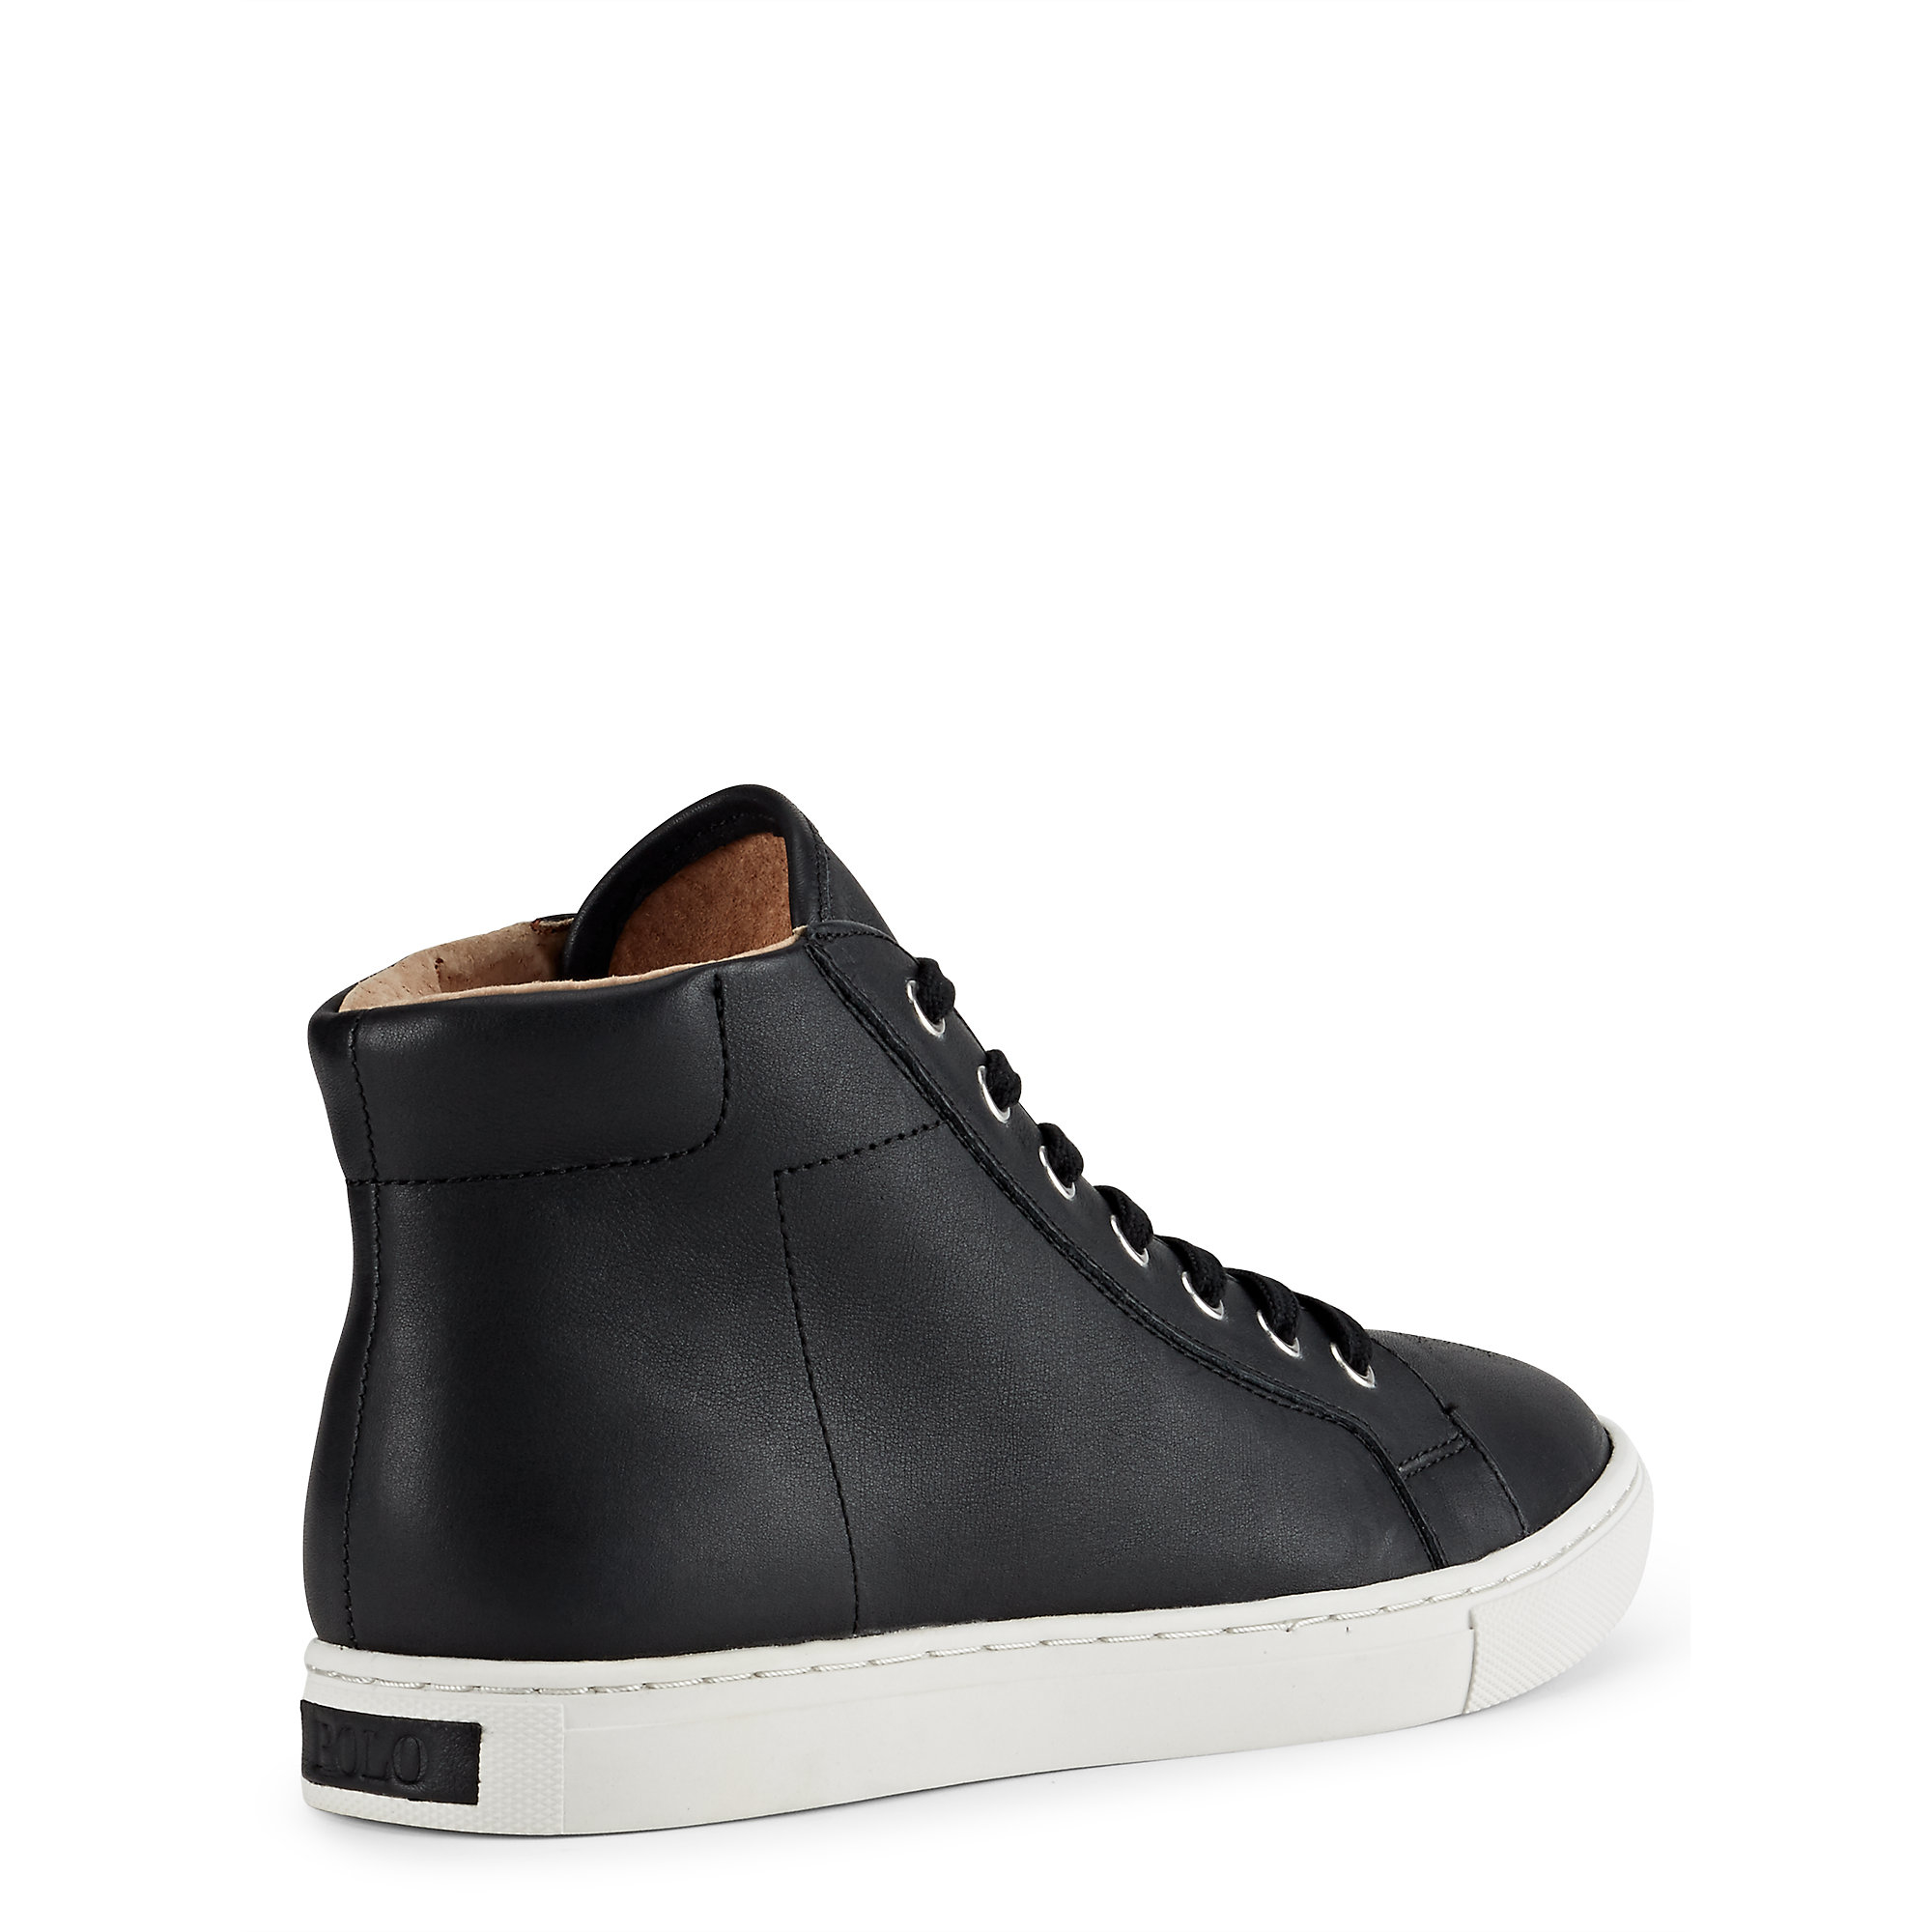 Polo Ralph Lauren Nappa Leather High-top Sneaker in Black for Men - Lyst